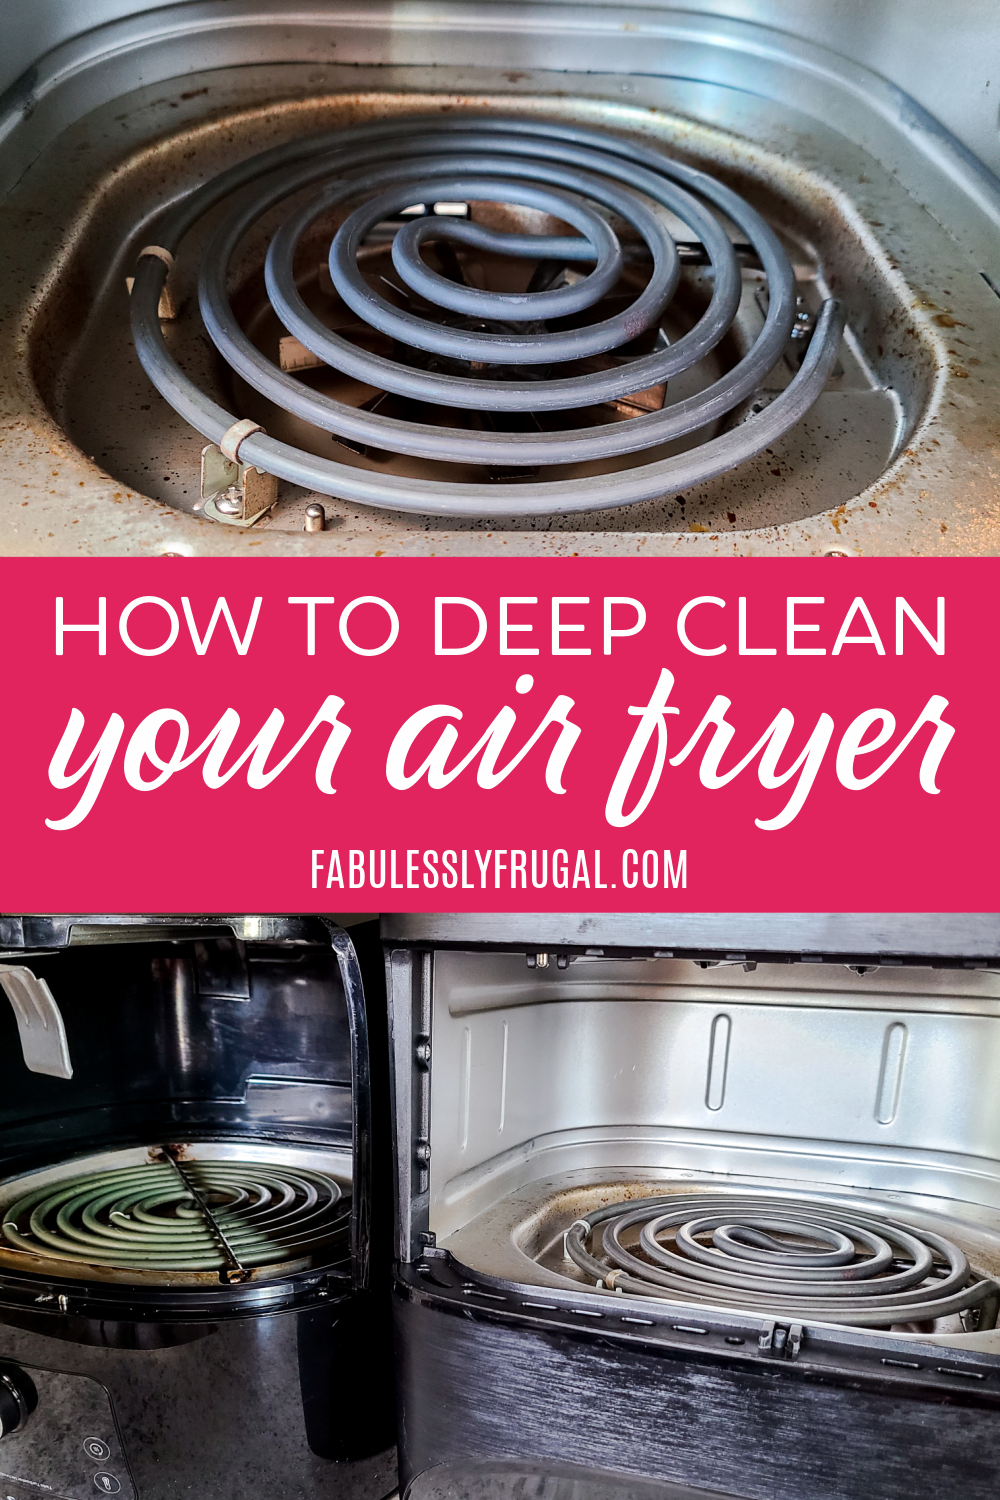 https://fabulesslyfrugal.com/wp-content/uploads/2021/02/how-to-deep-clean-your-air-fryer.png